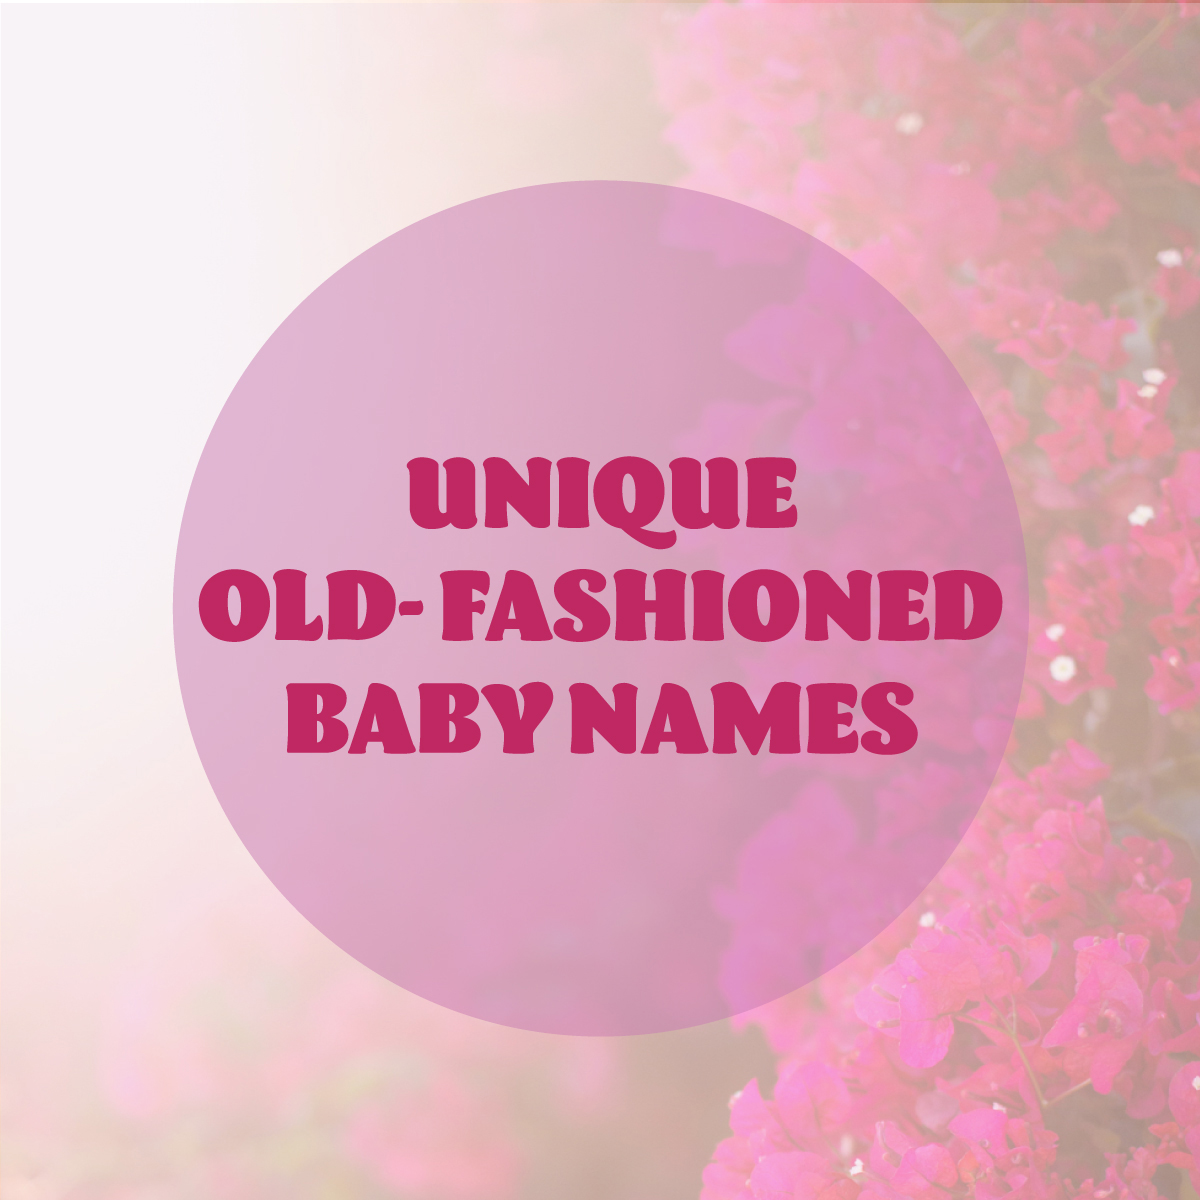 old lady baby girl names